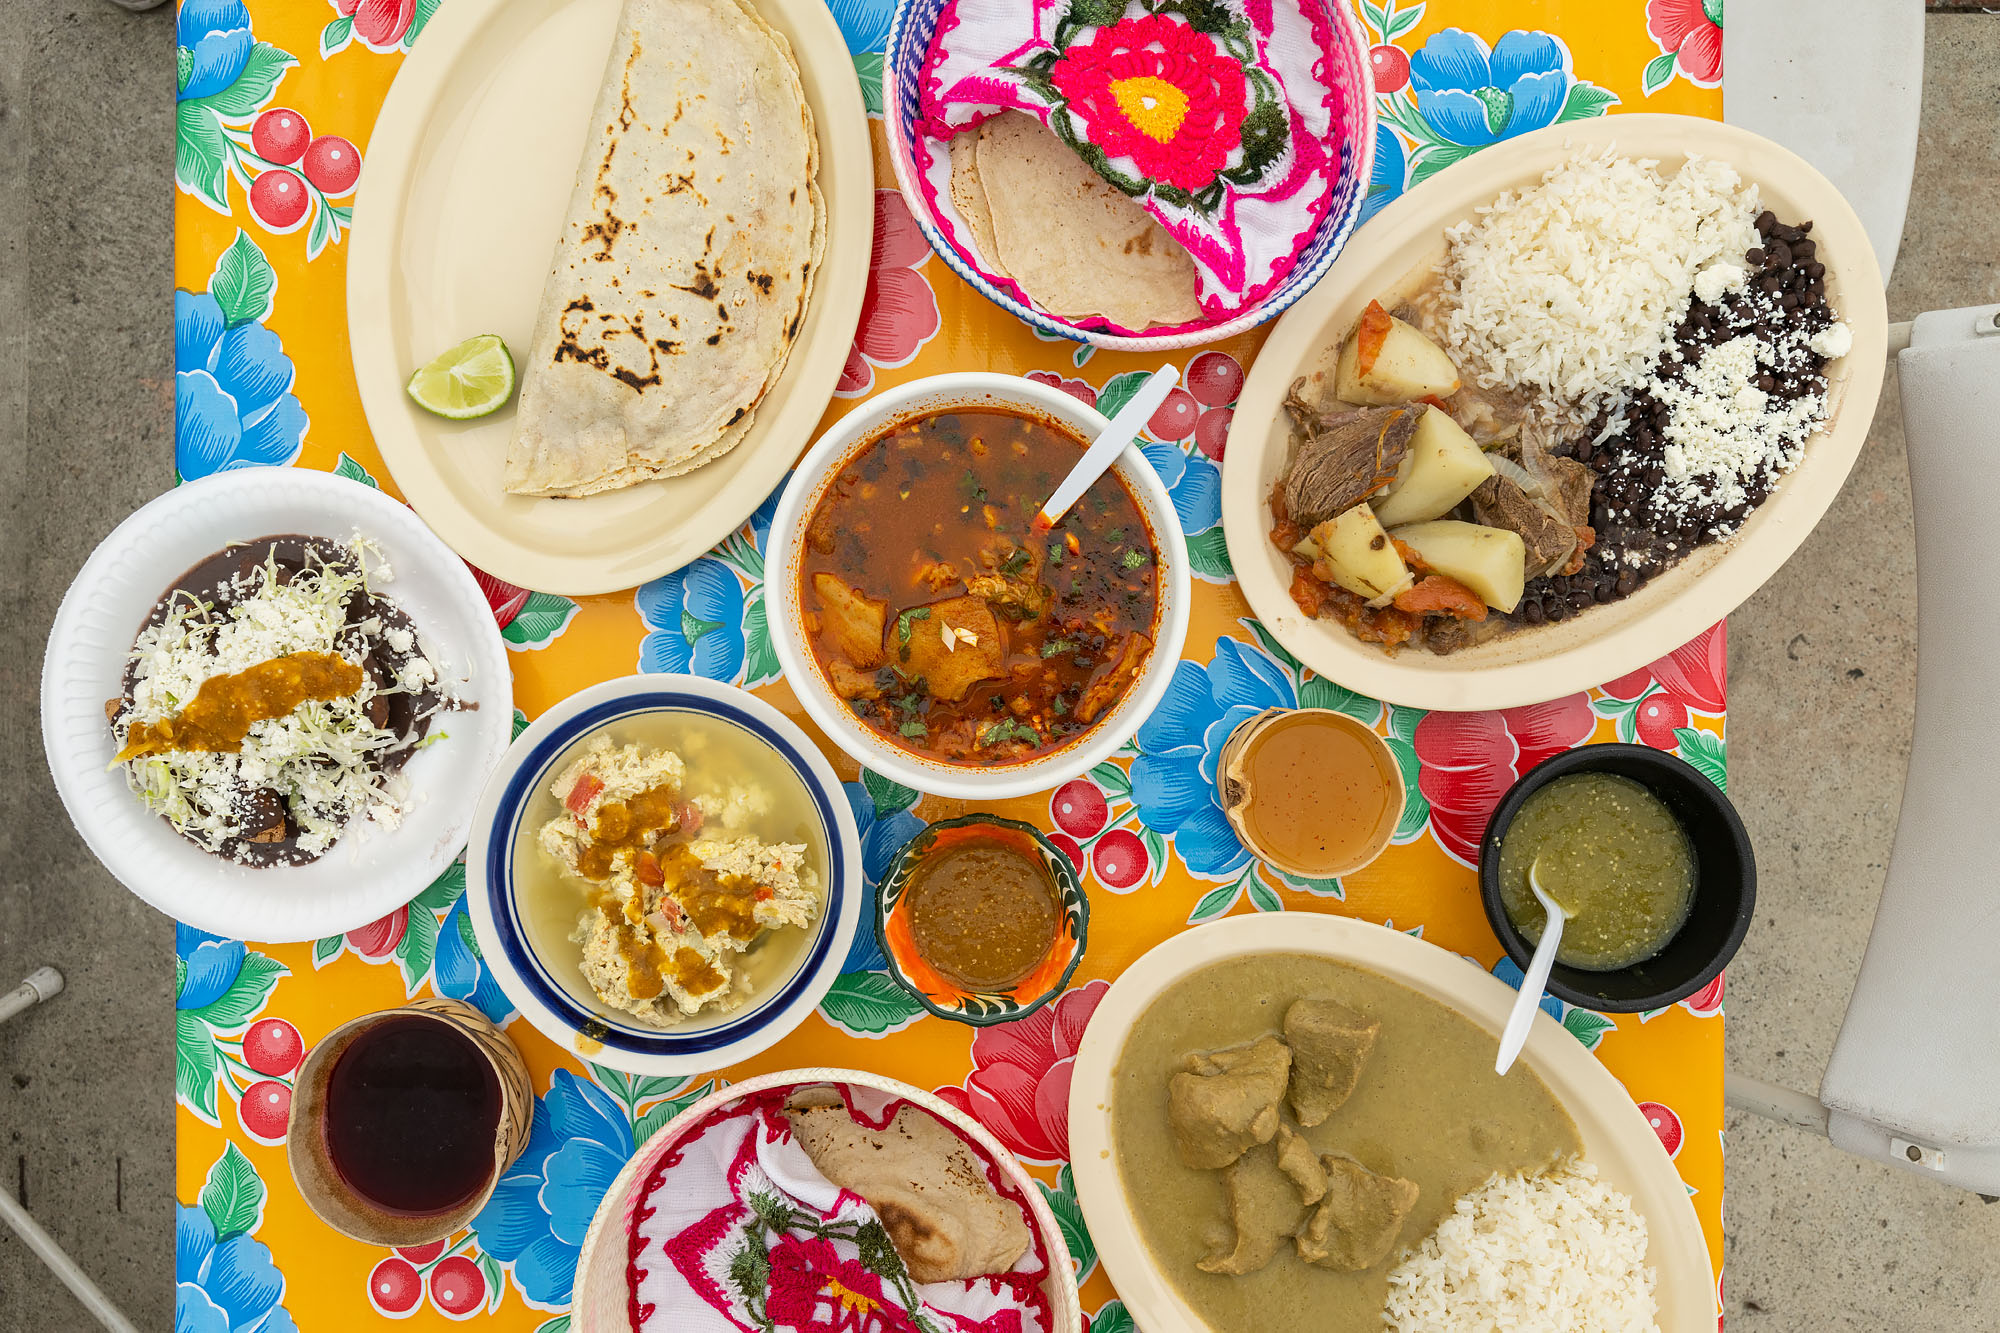 Traditional Oaxacan dishes laid out on a colorful table.